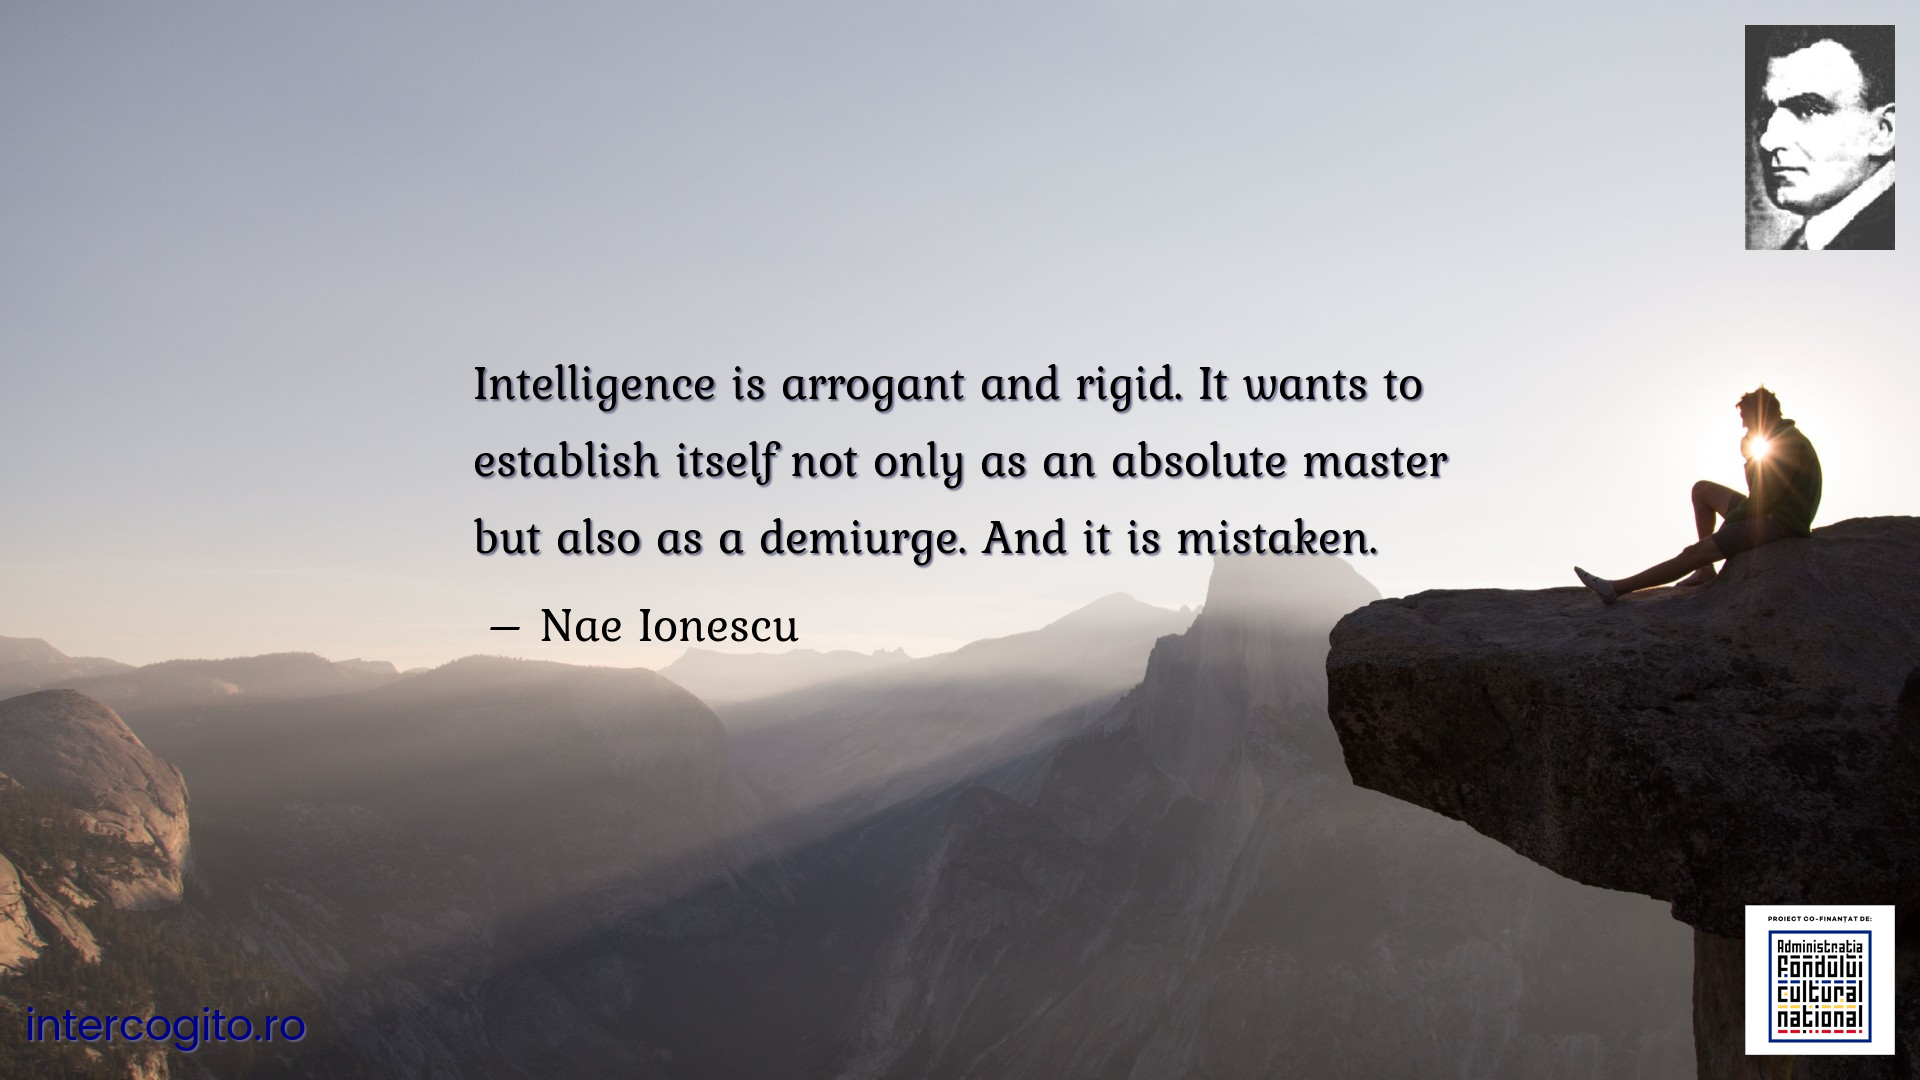 Intelligence is arrogant and rigid. It wants to establish itself not only as an absolute master but also as a demiurge. And it is mistaken.